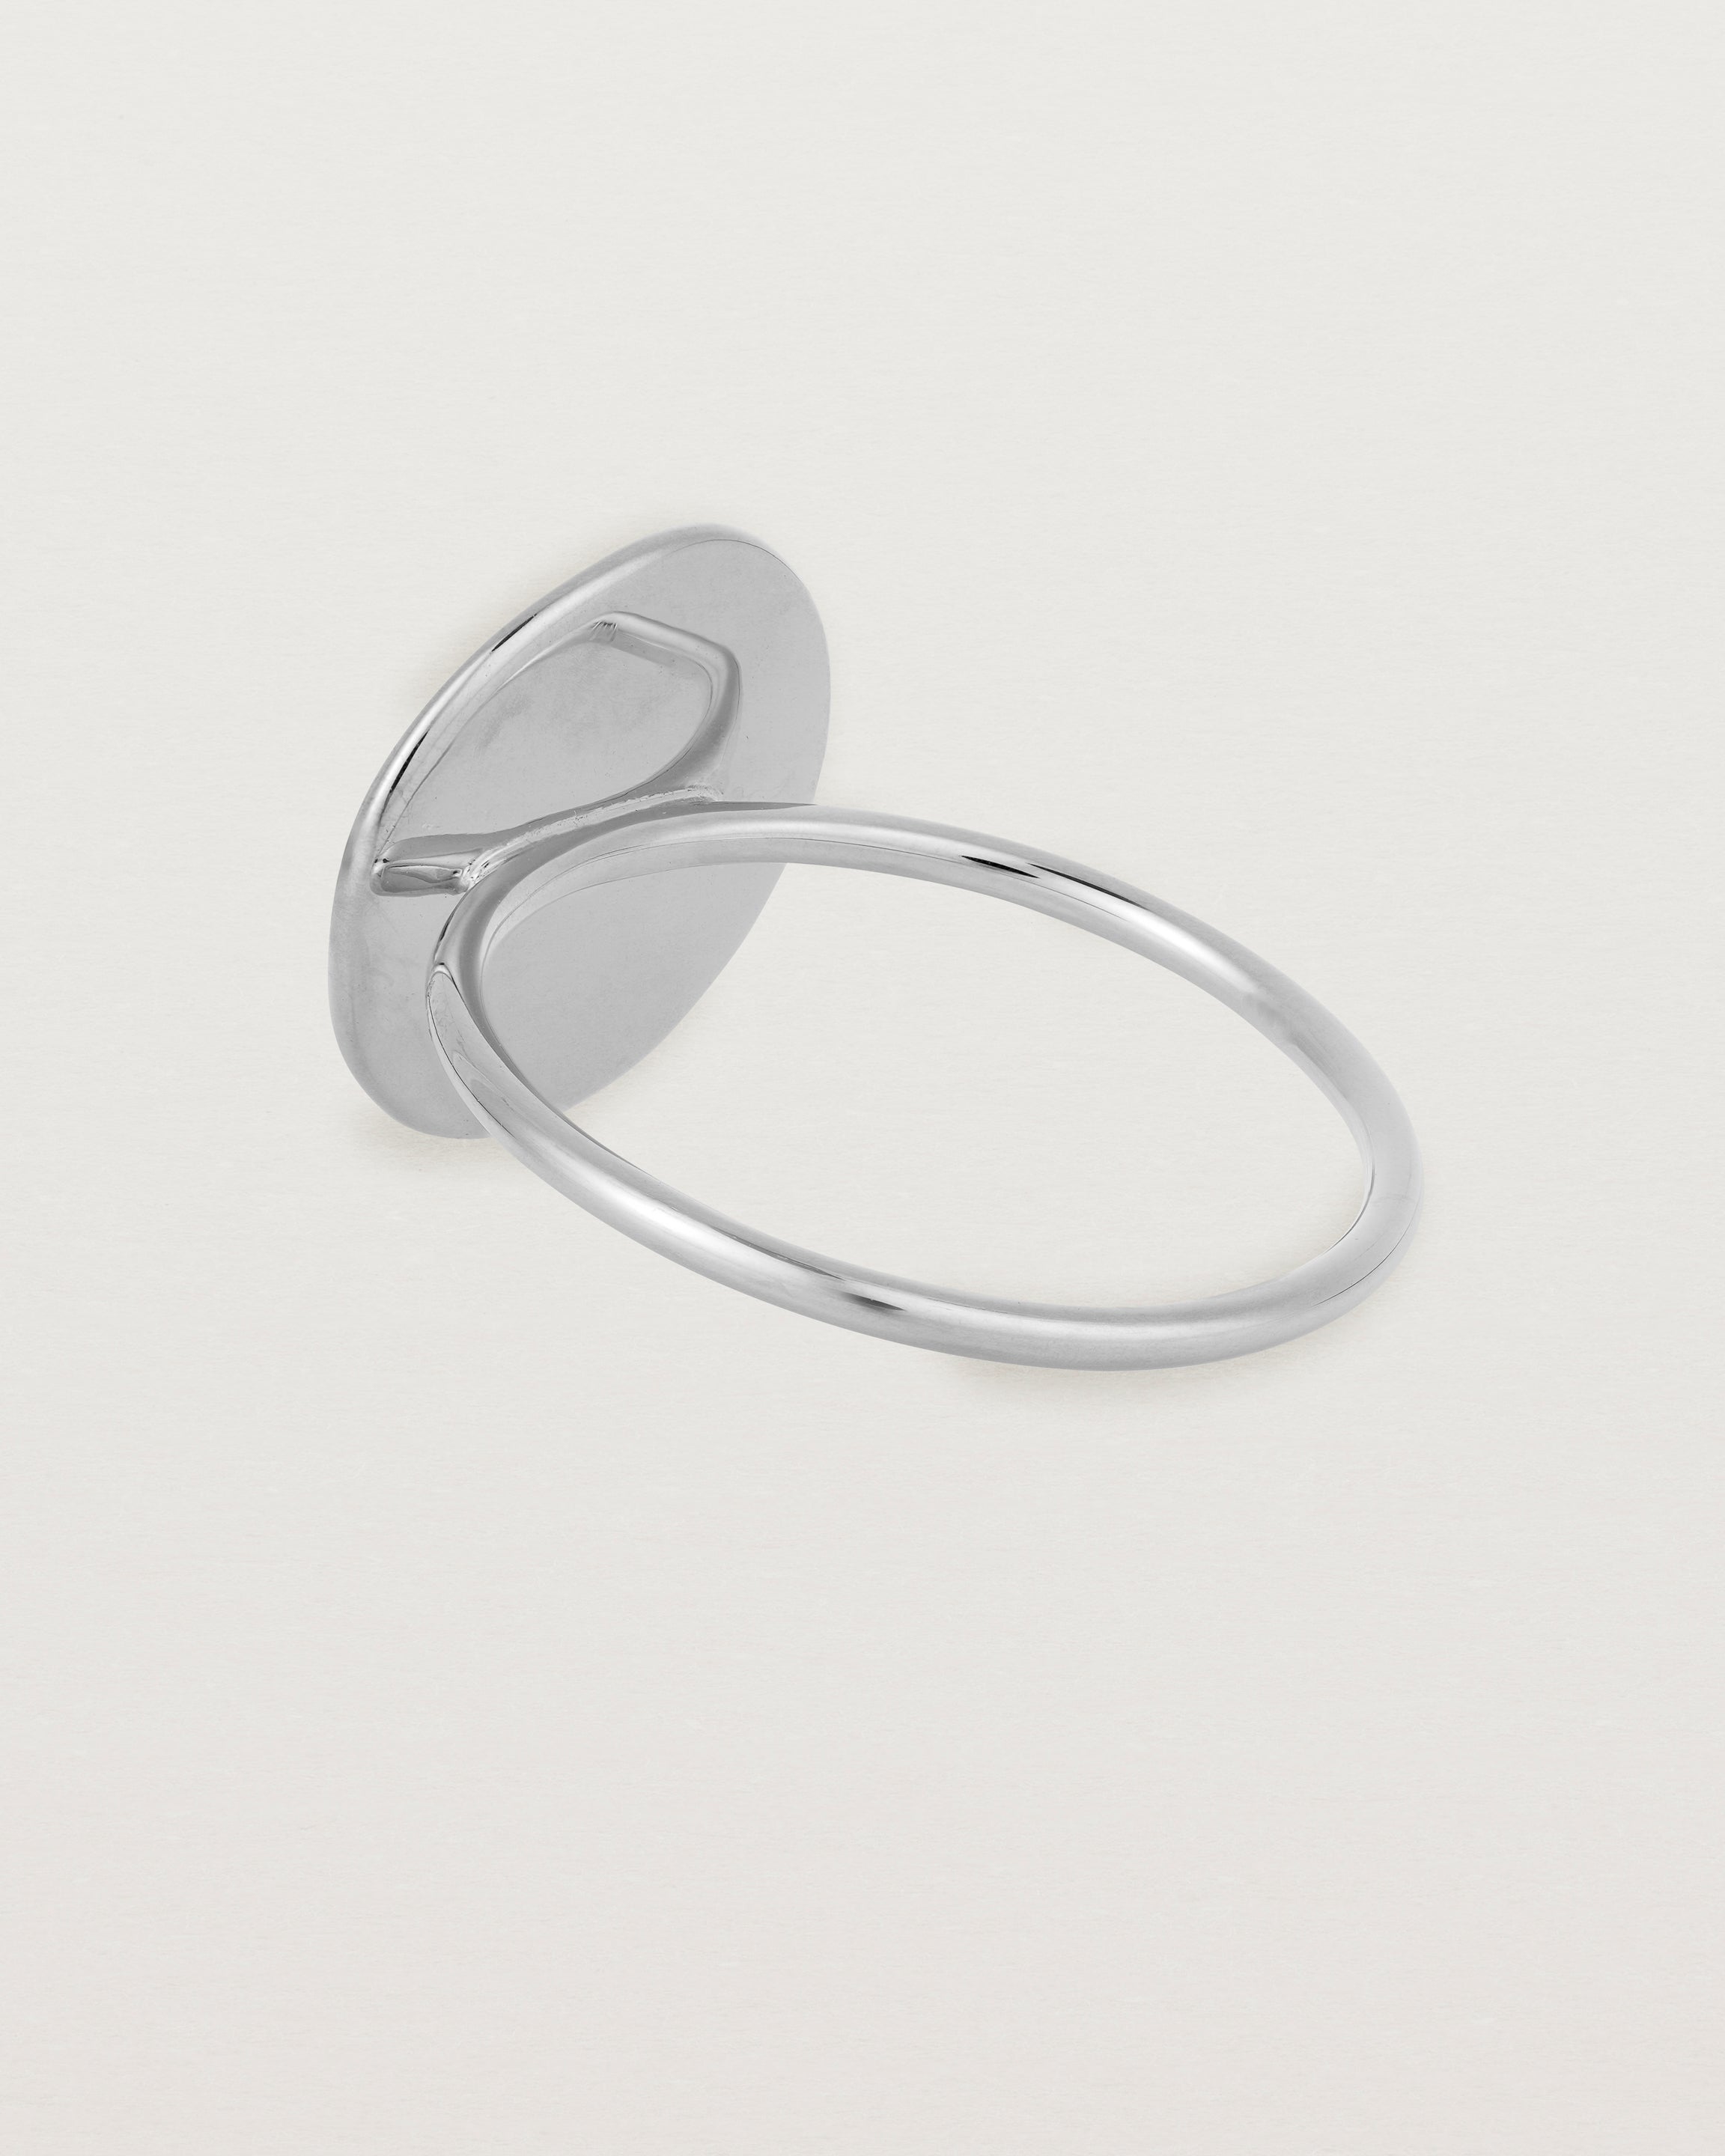 Back view of the Mana Ring in Sterling Silver.